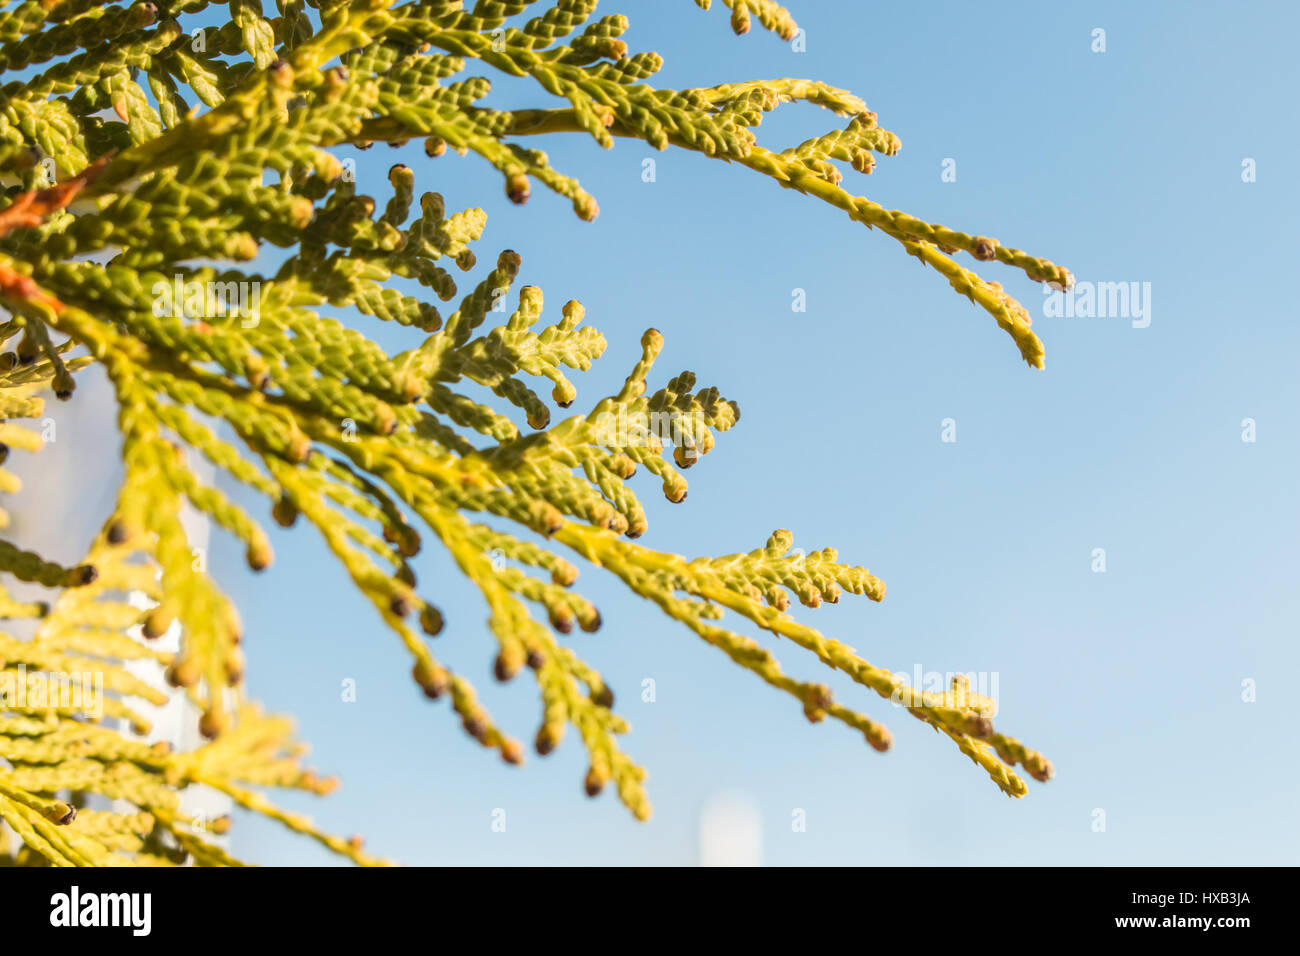 Branch of Thuya with buds in spring closeup against a background of bright blue sky. Stock Photo